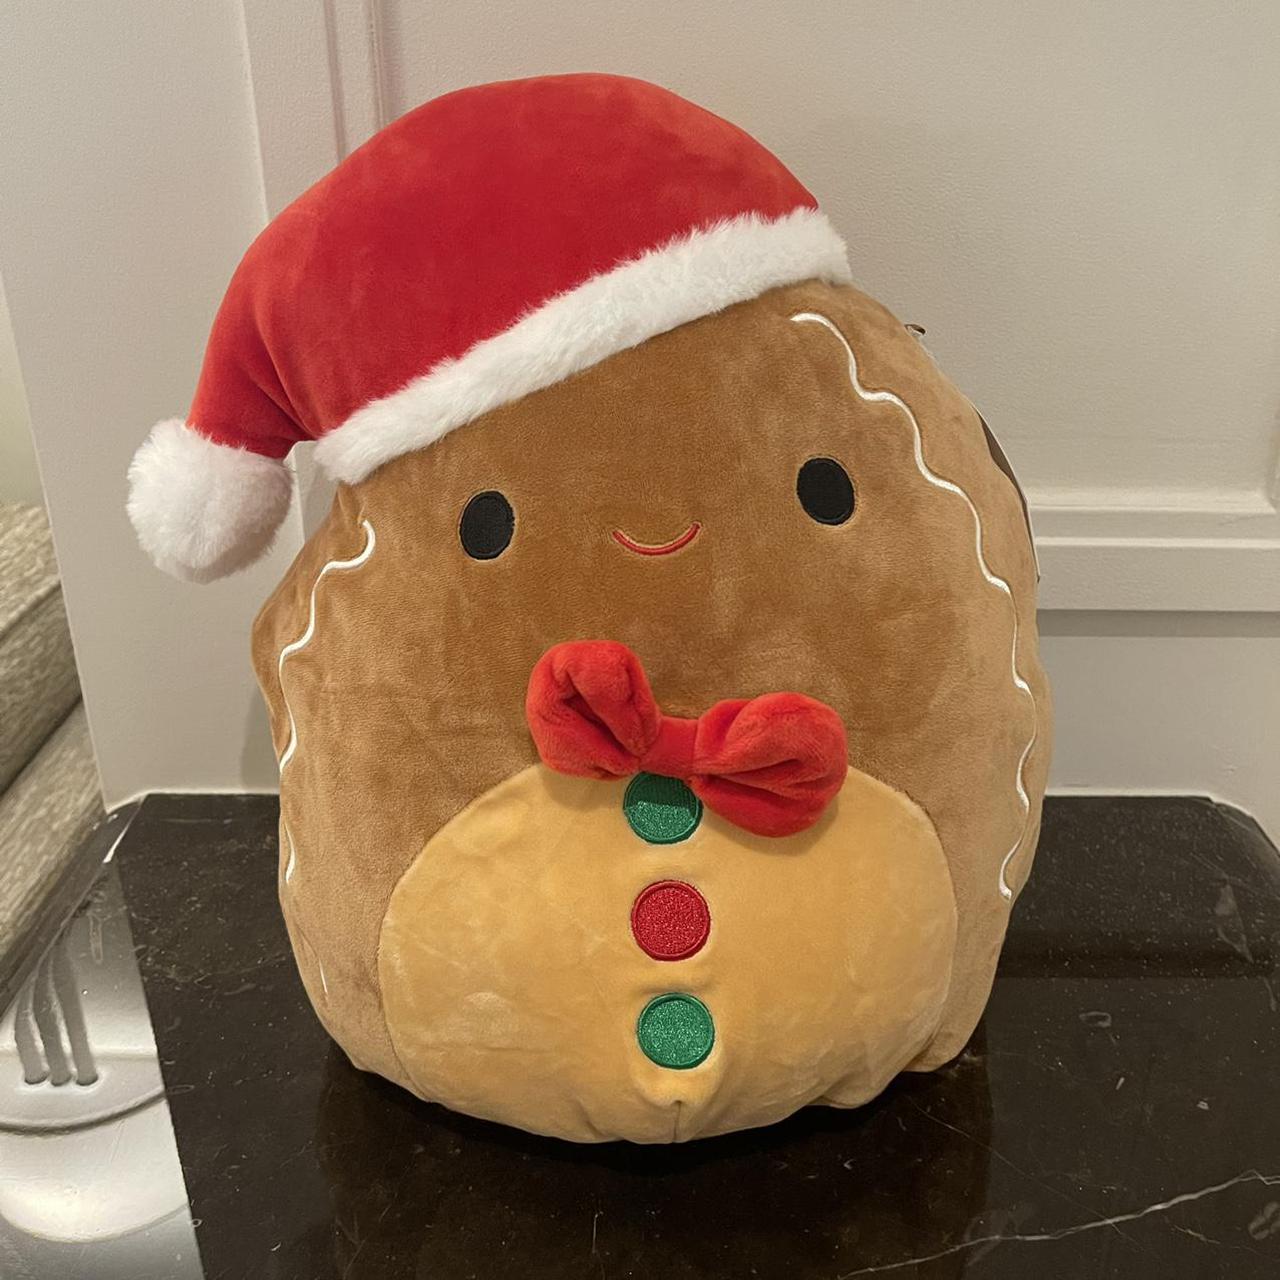 Squishmallow 12 Inch Jordan the Gingerbread Boy Christmas Plush Toy - Owl &  Goose Gifts